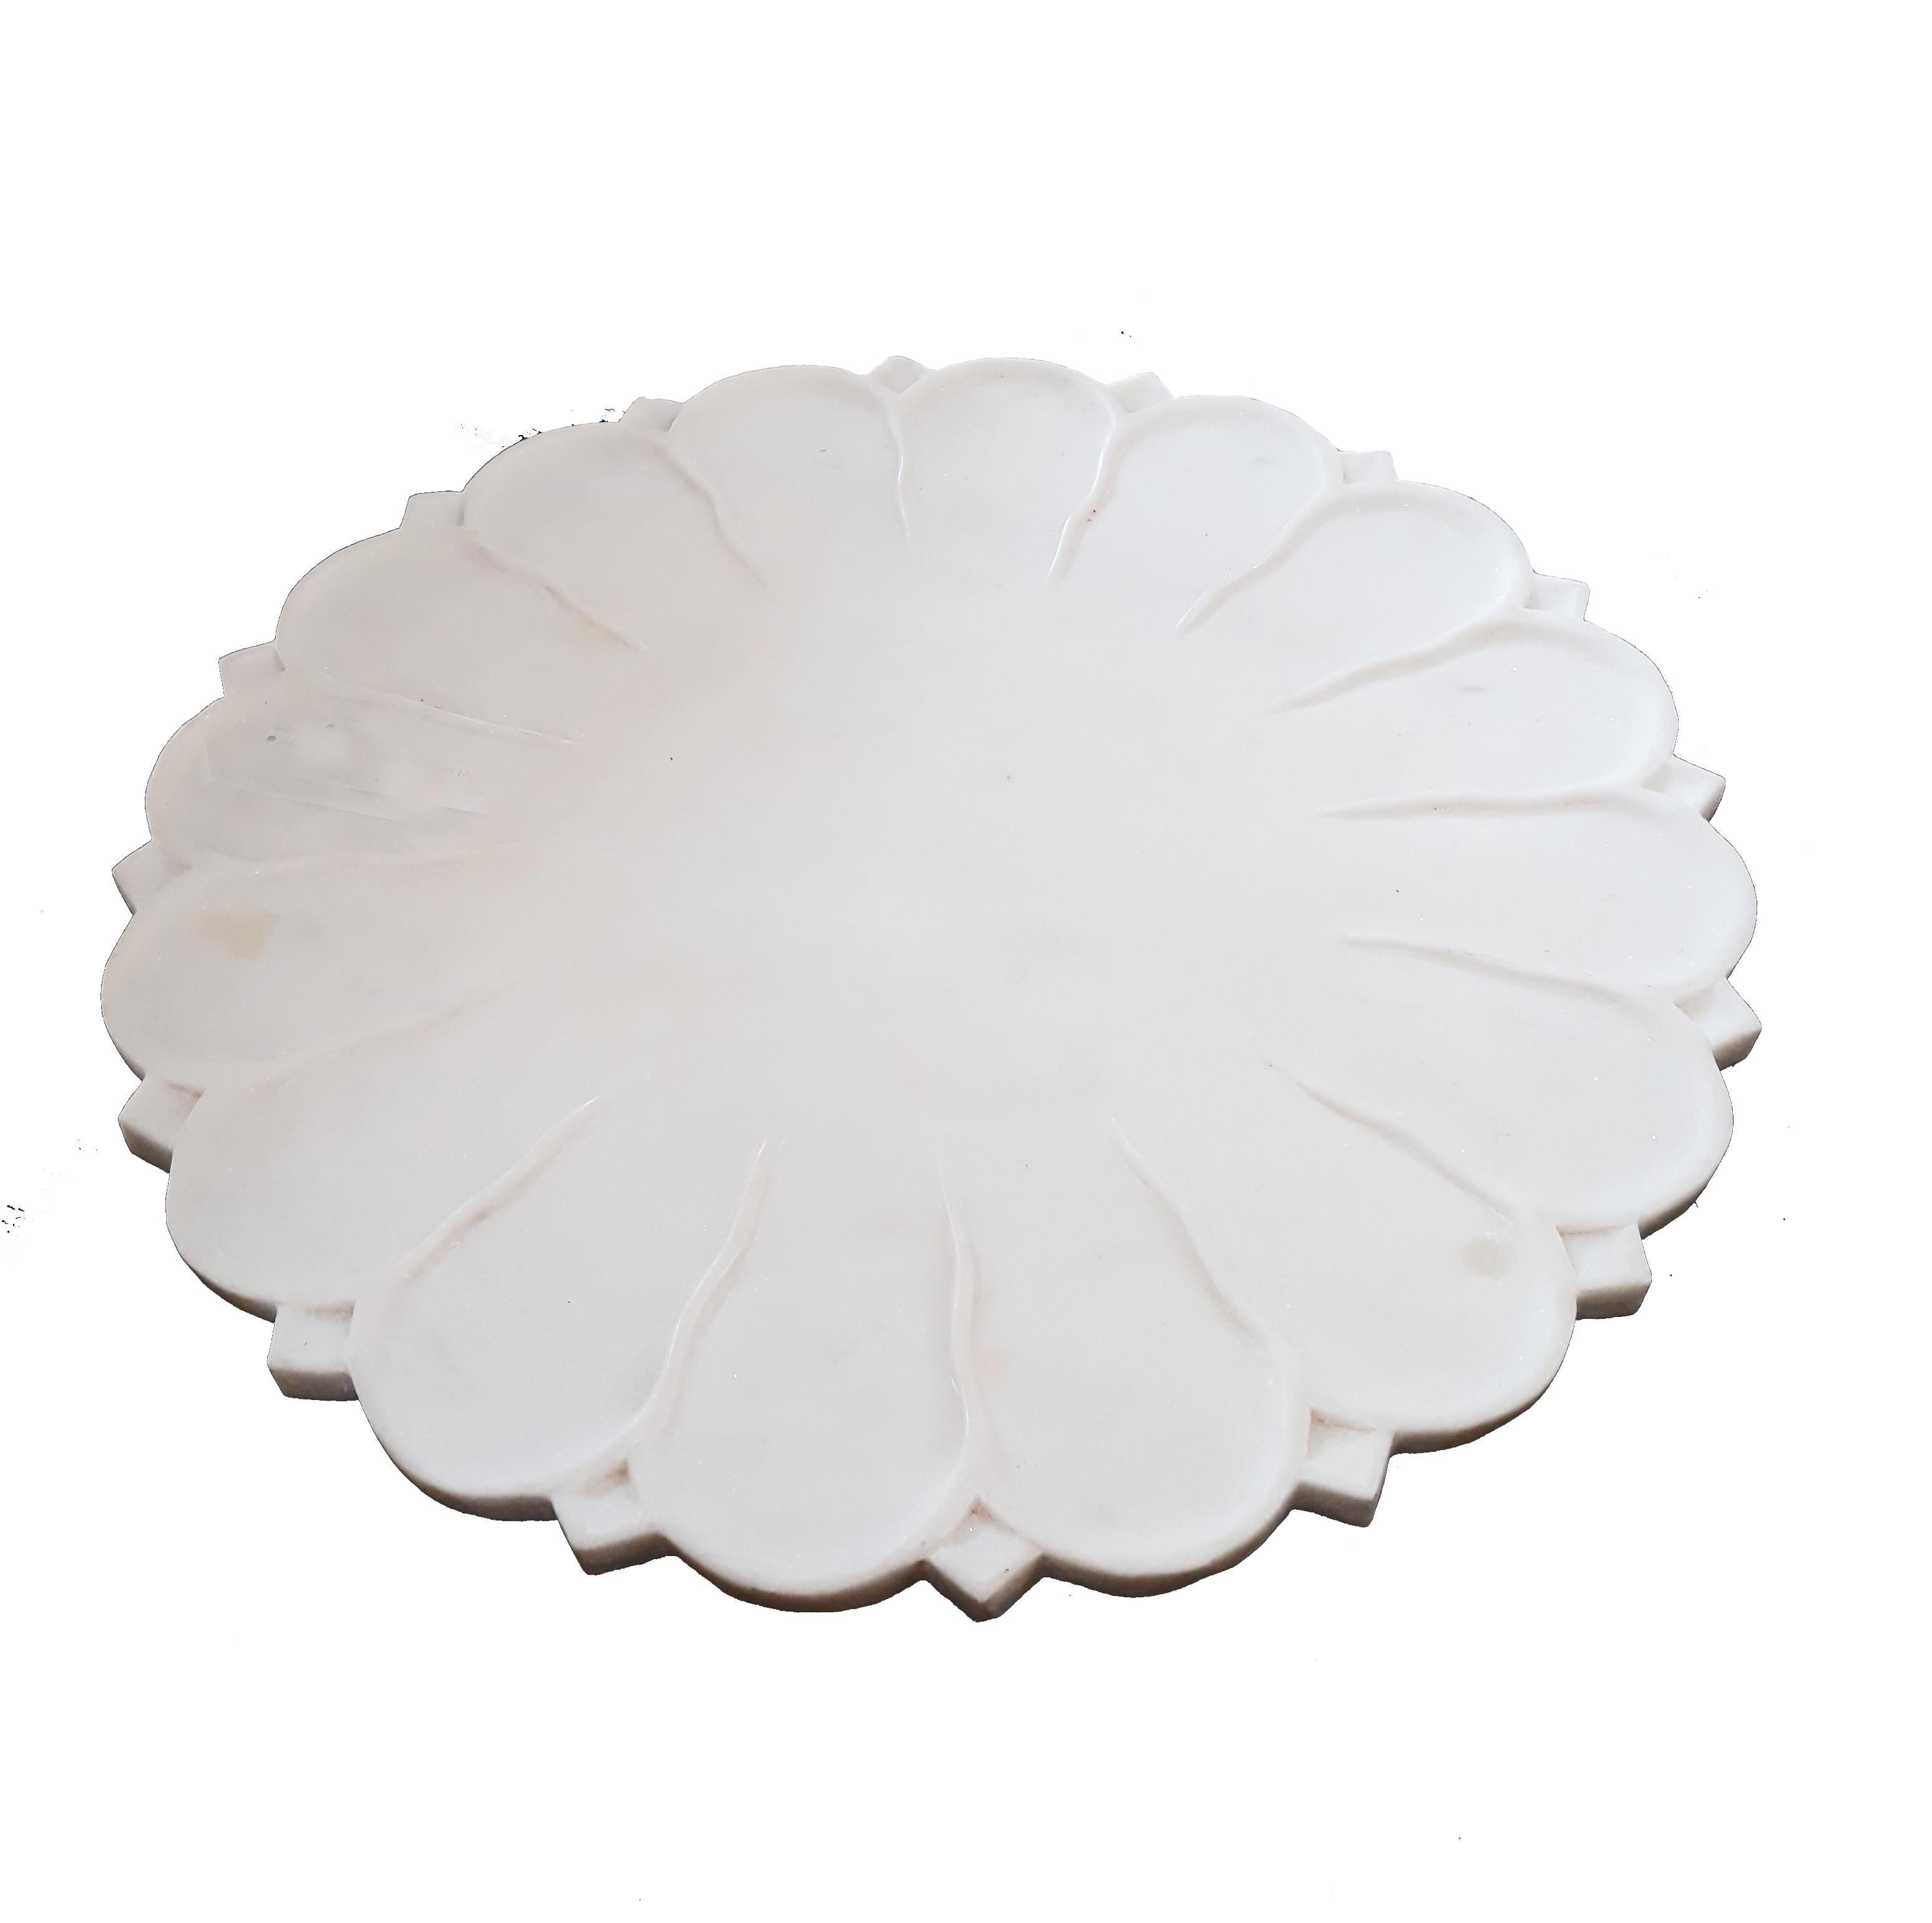 A hand-carved marble platter, server or charger from India. 18 inches diameter. Two available.